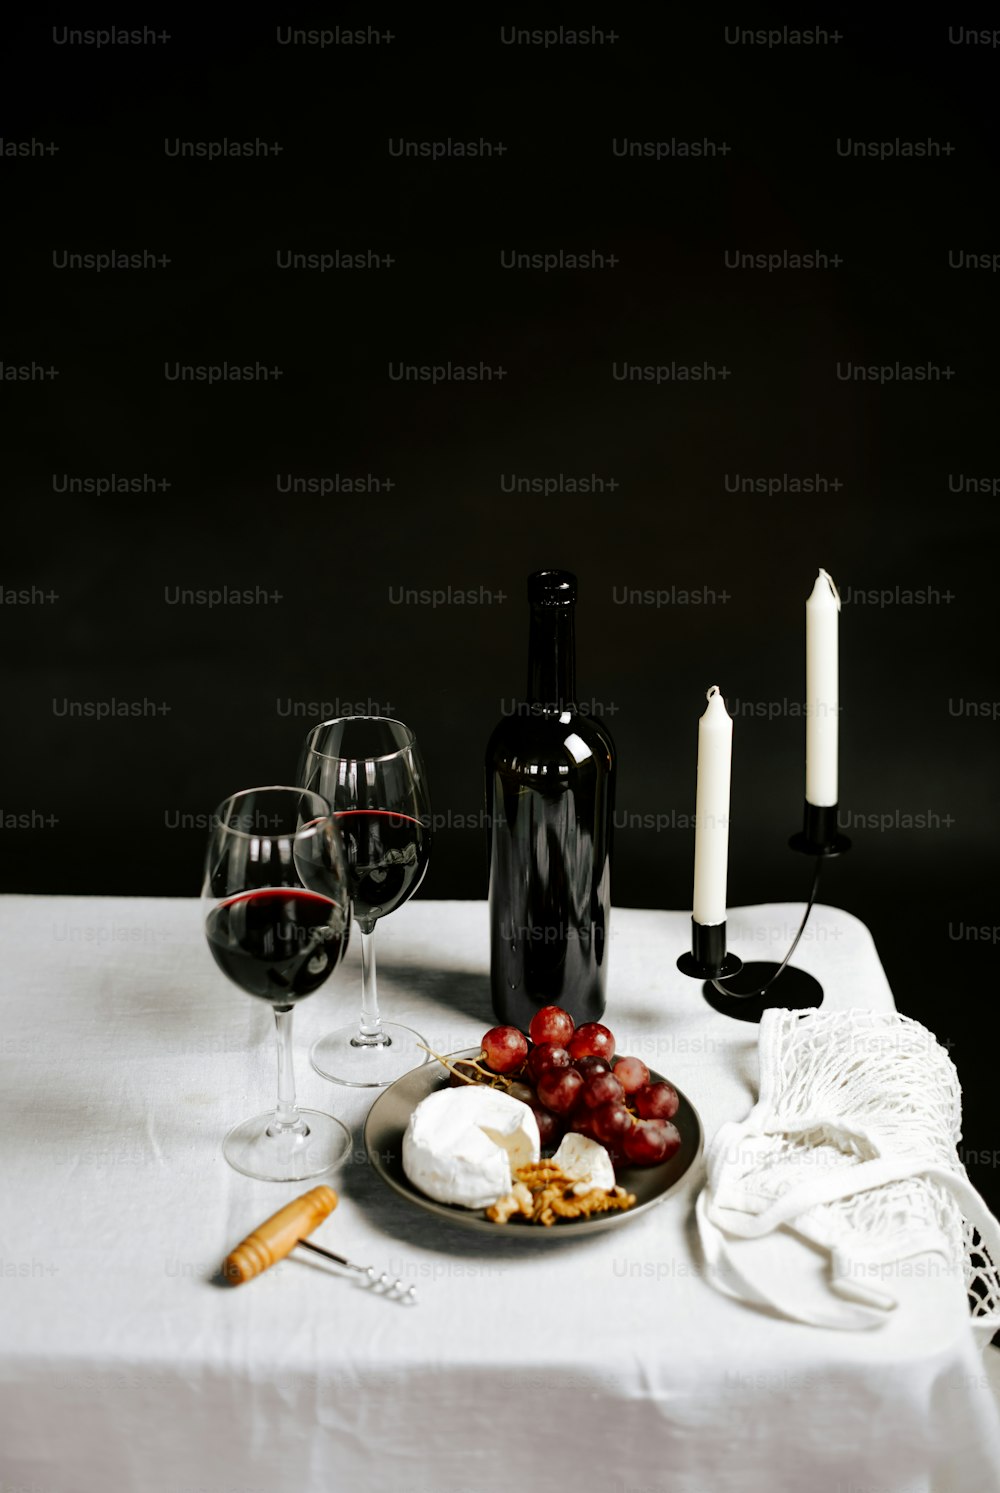 a plate of food and two wine glasses on a table